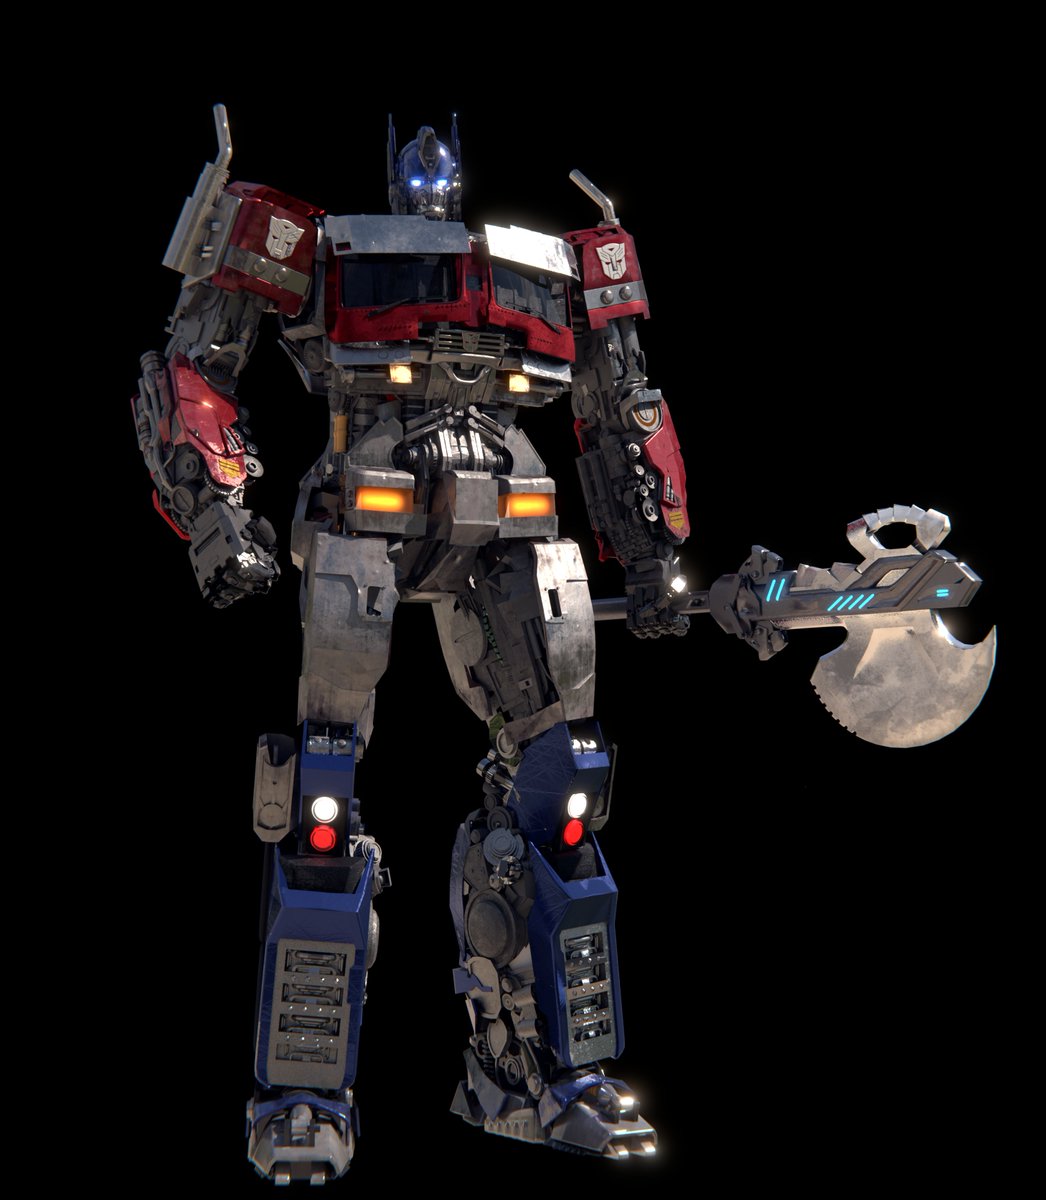 some render tests of #OptimusPrime 
#Transformers #RiseOfTheBeasts @ROTBTrailer